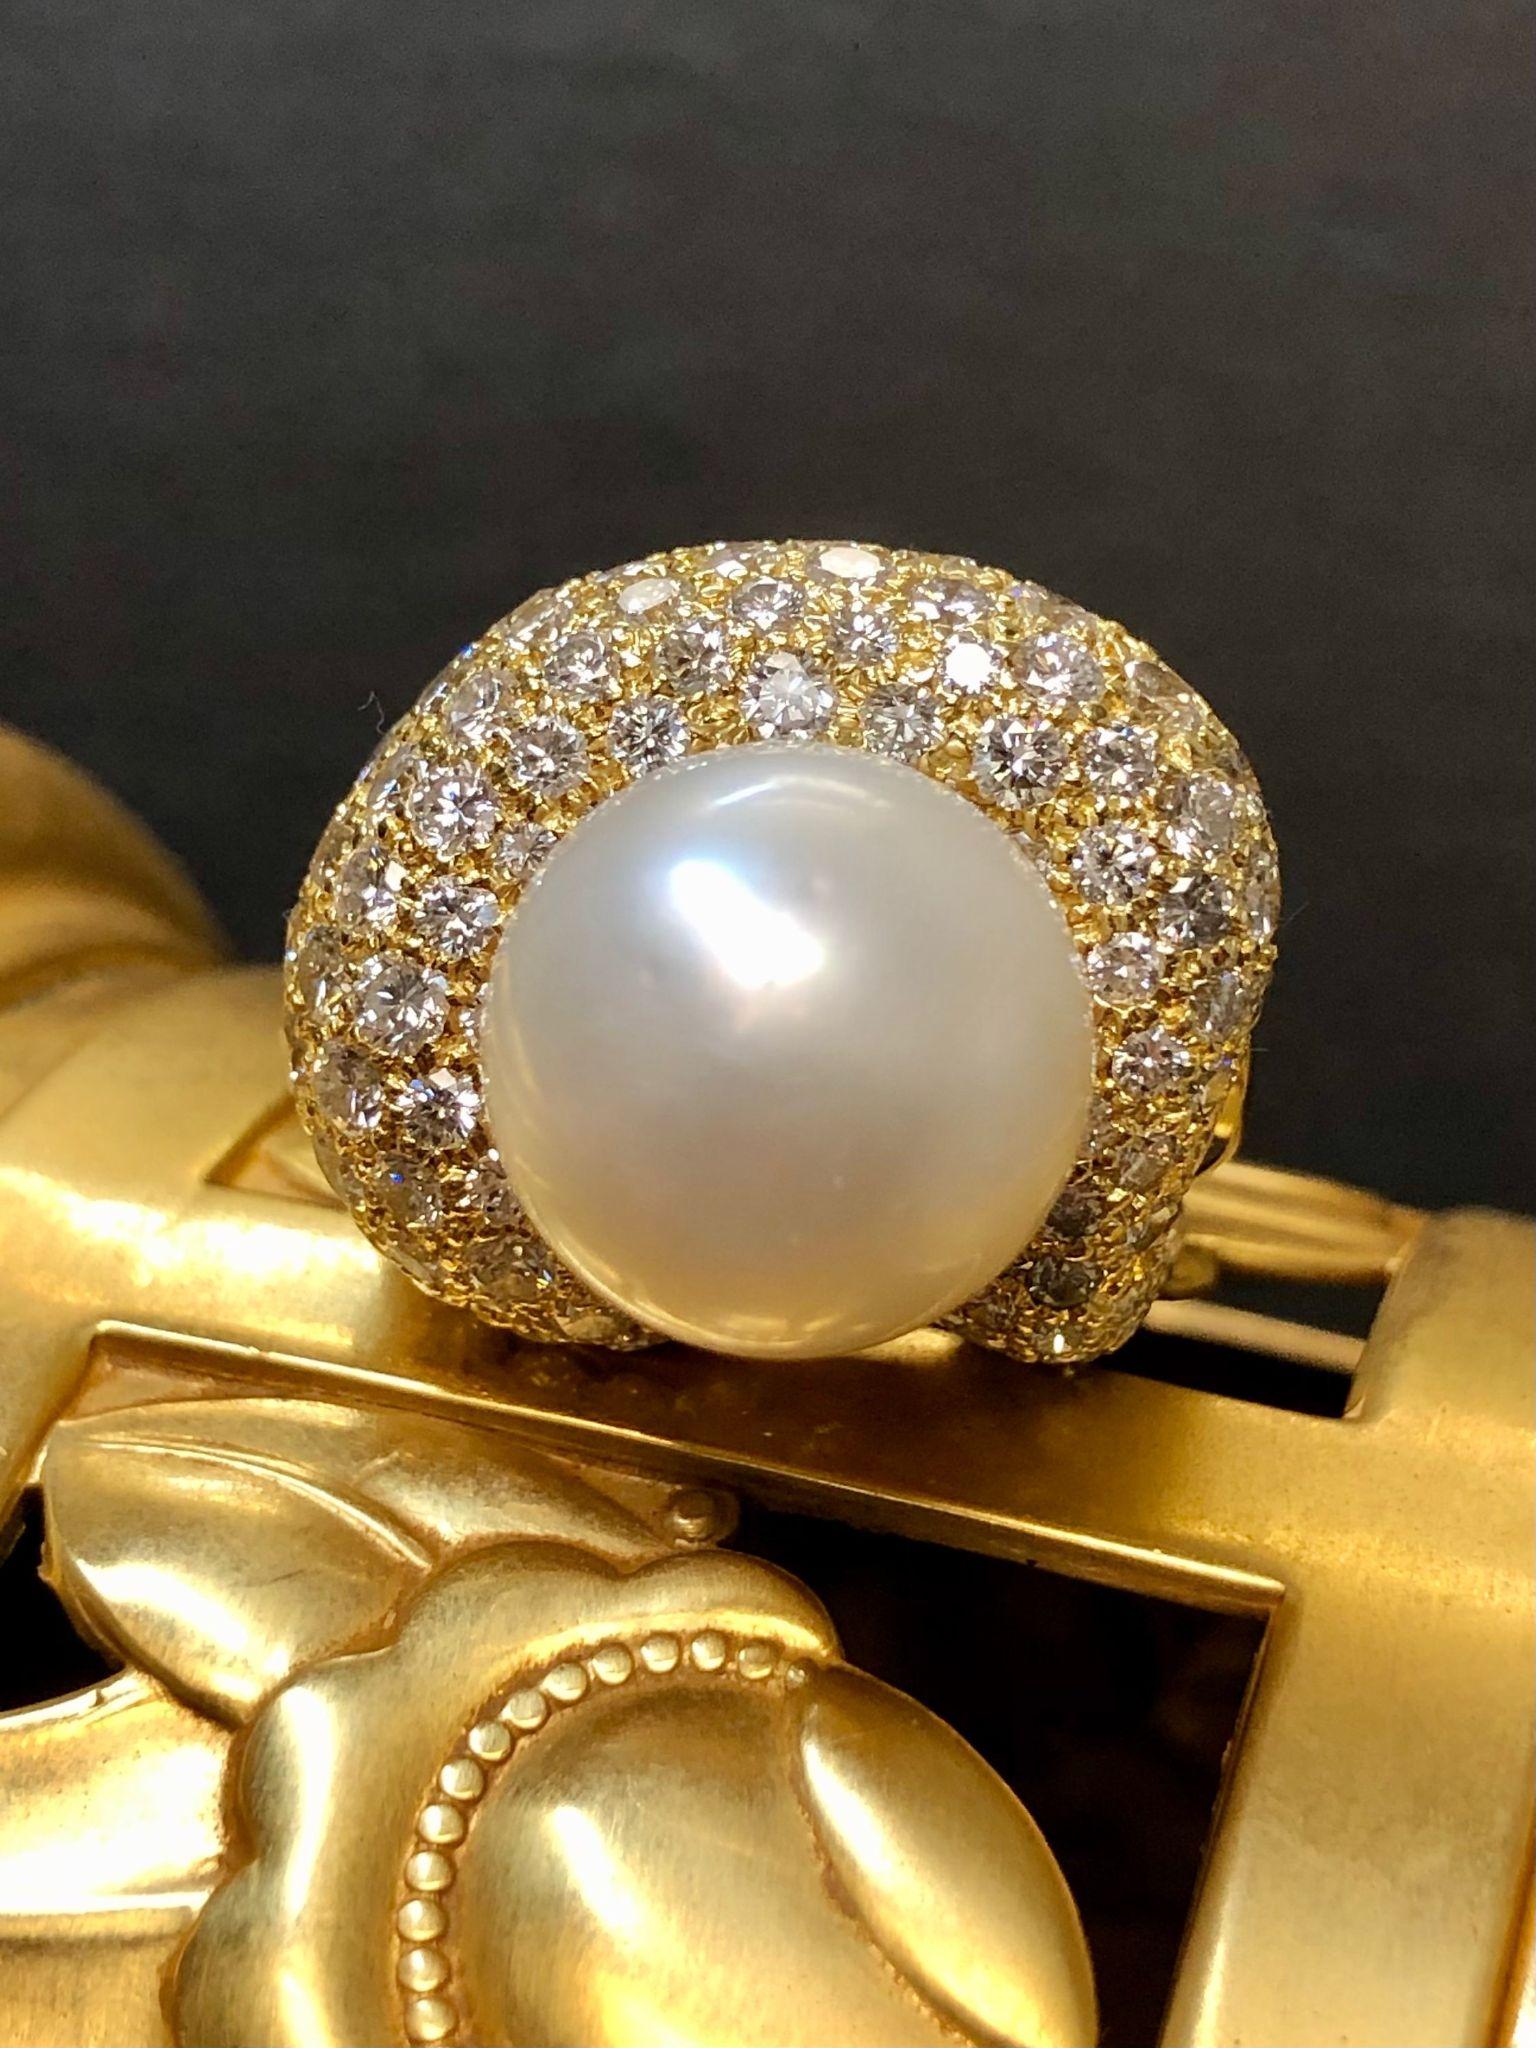 18K Pave Diamond Pearl Cocktail Ring 6cttw Sz 5.25 In Good Condition For Sale In Winter Springs, FL